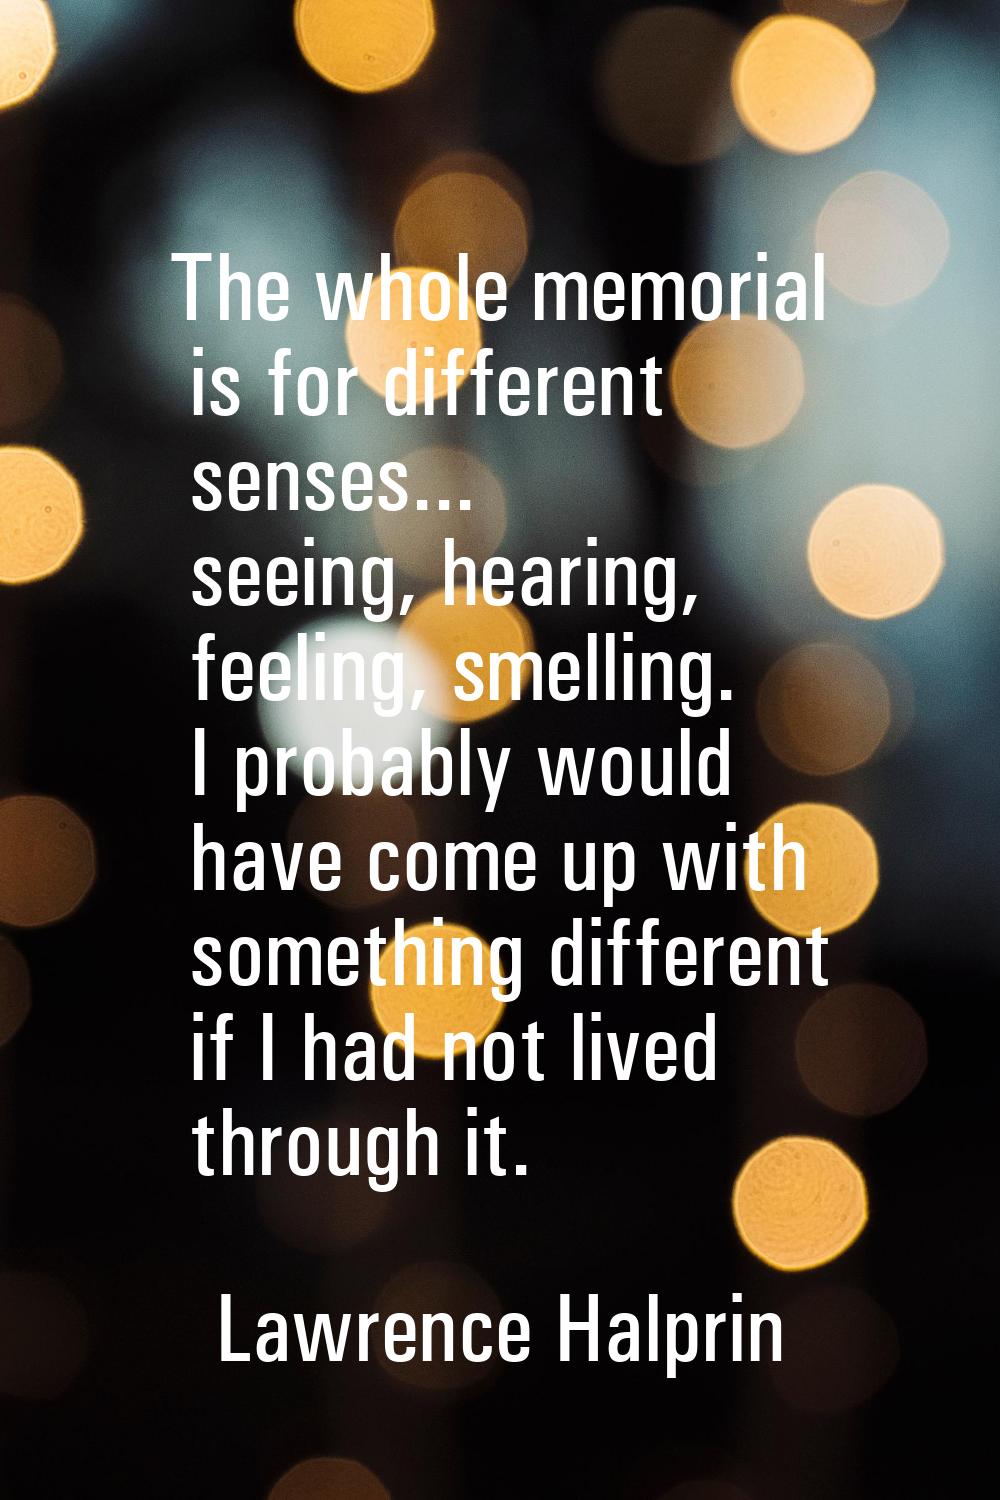 The whole memorial is for different senses... seeing, hearing, feeling, smelling. I probably would 